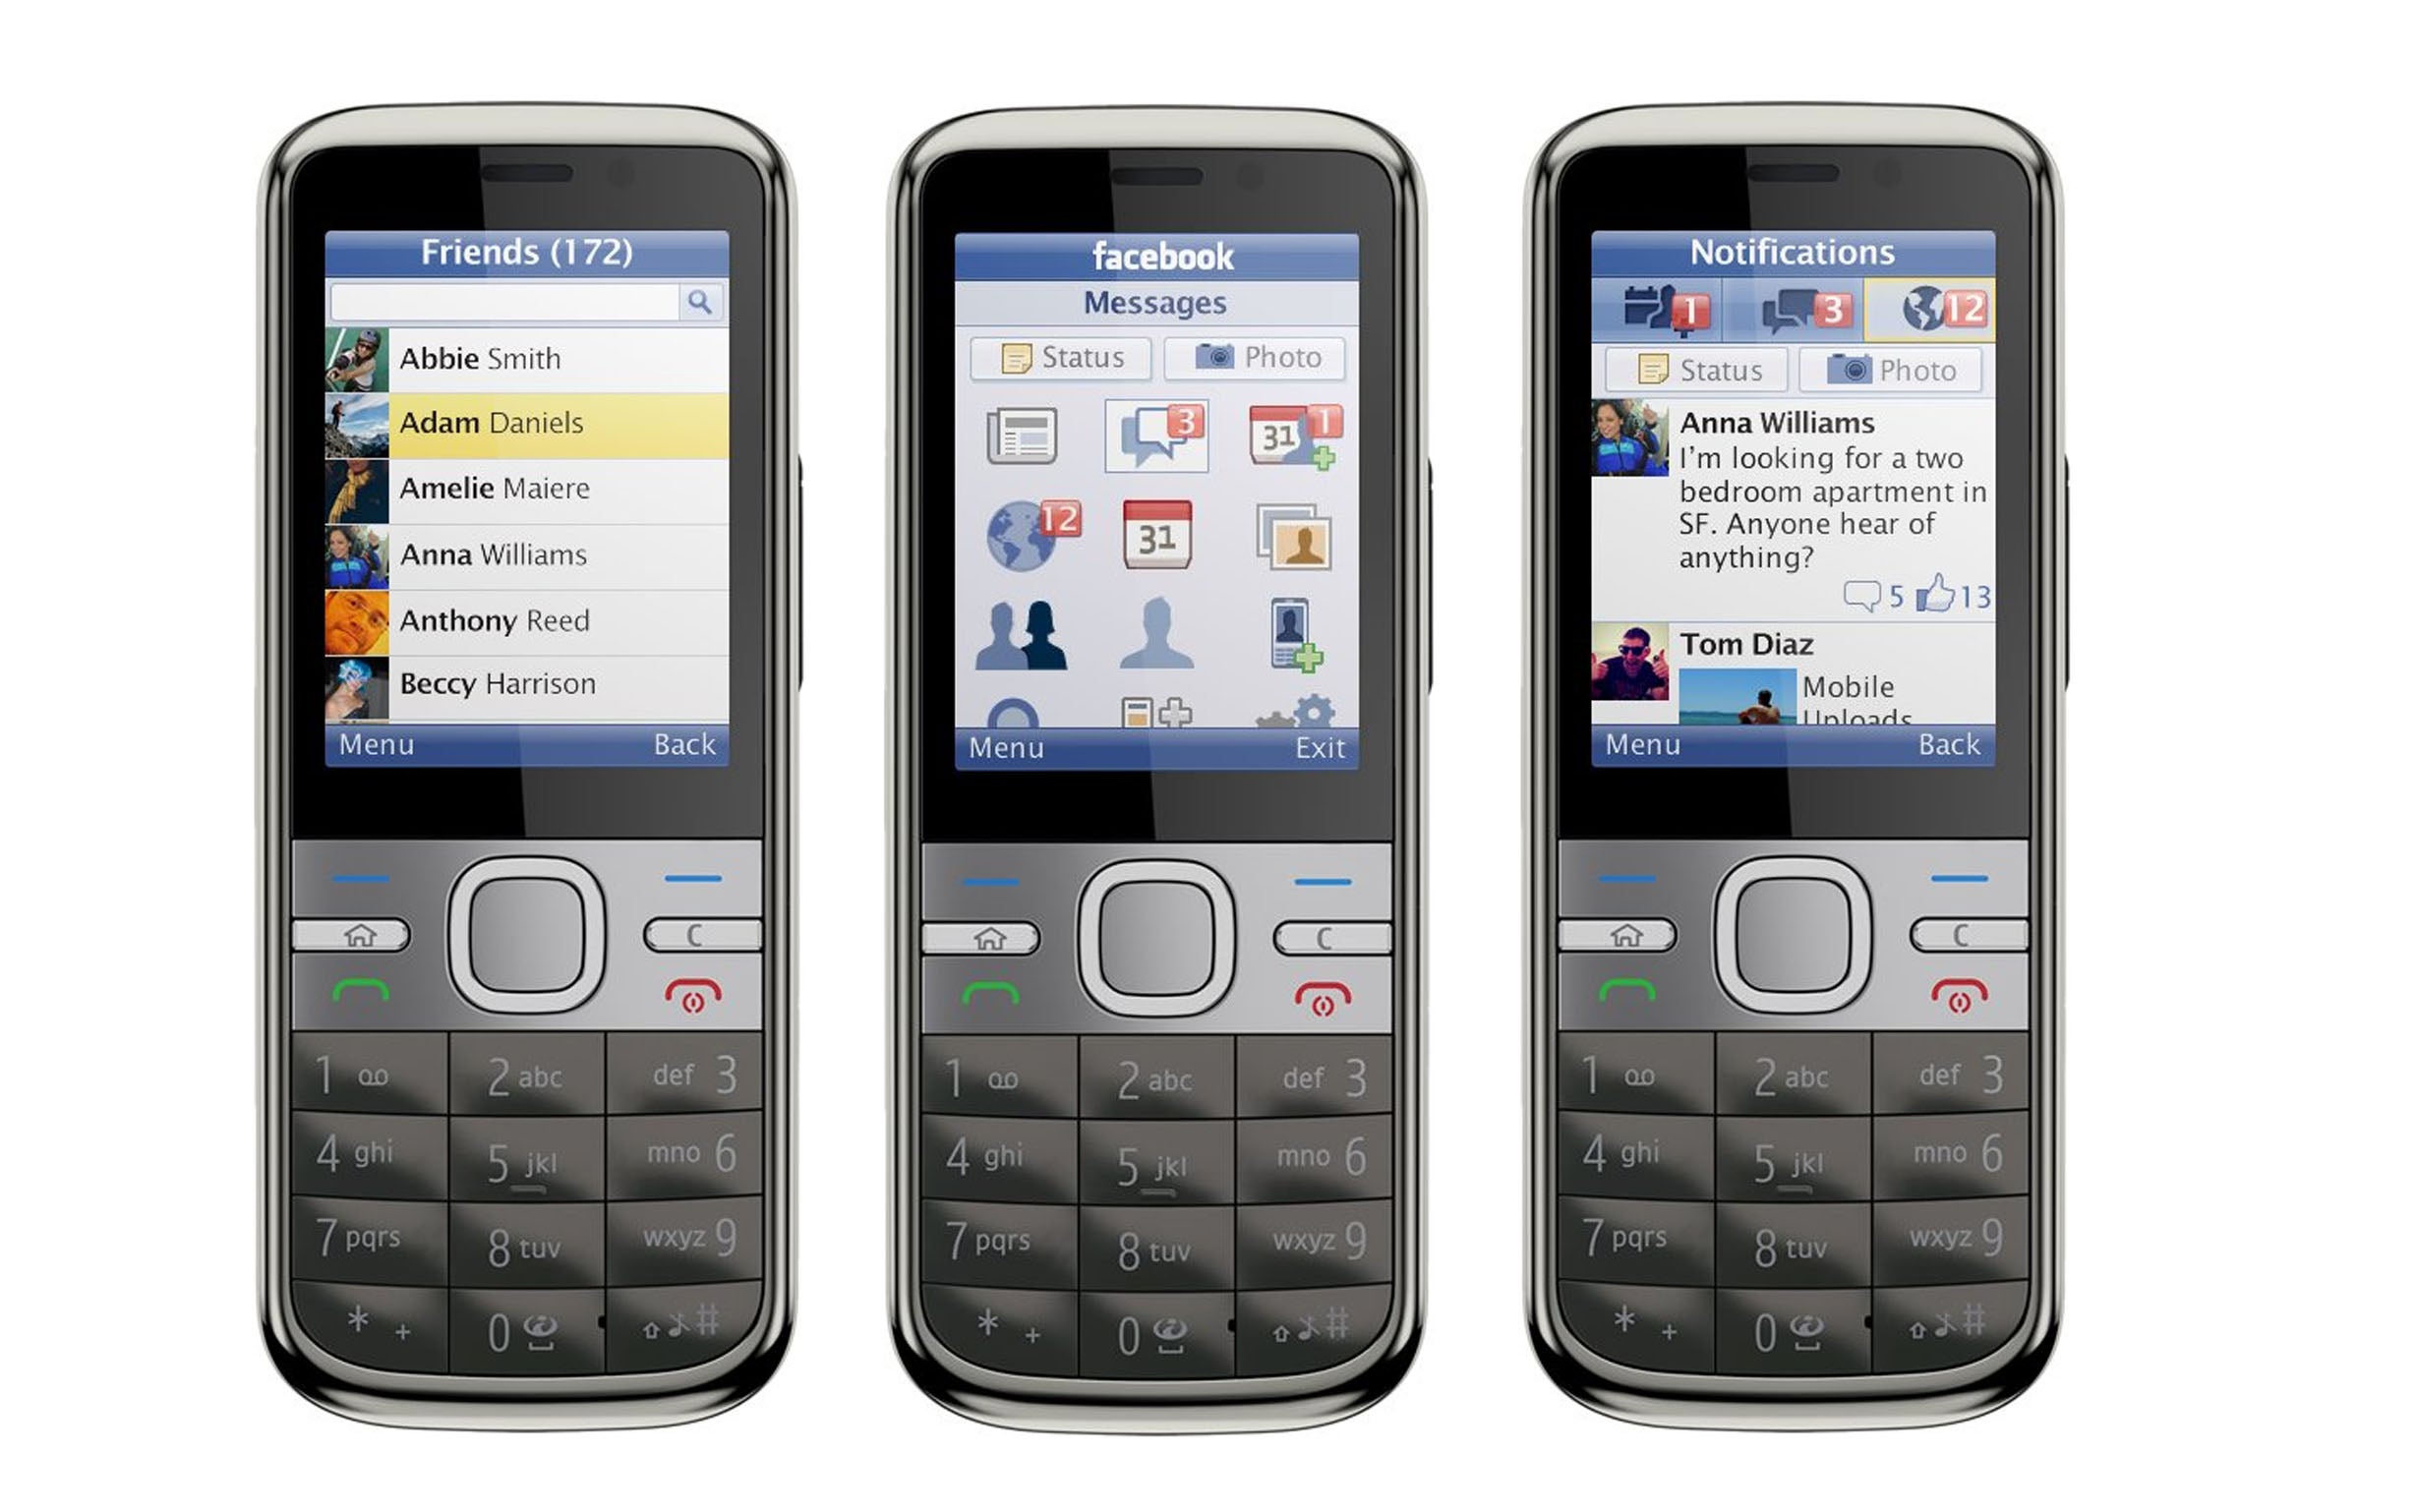 Facebook For Every Phone has been optimised to replicate the smartphone experience on feature phones